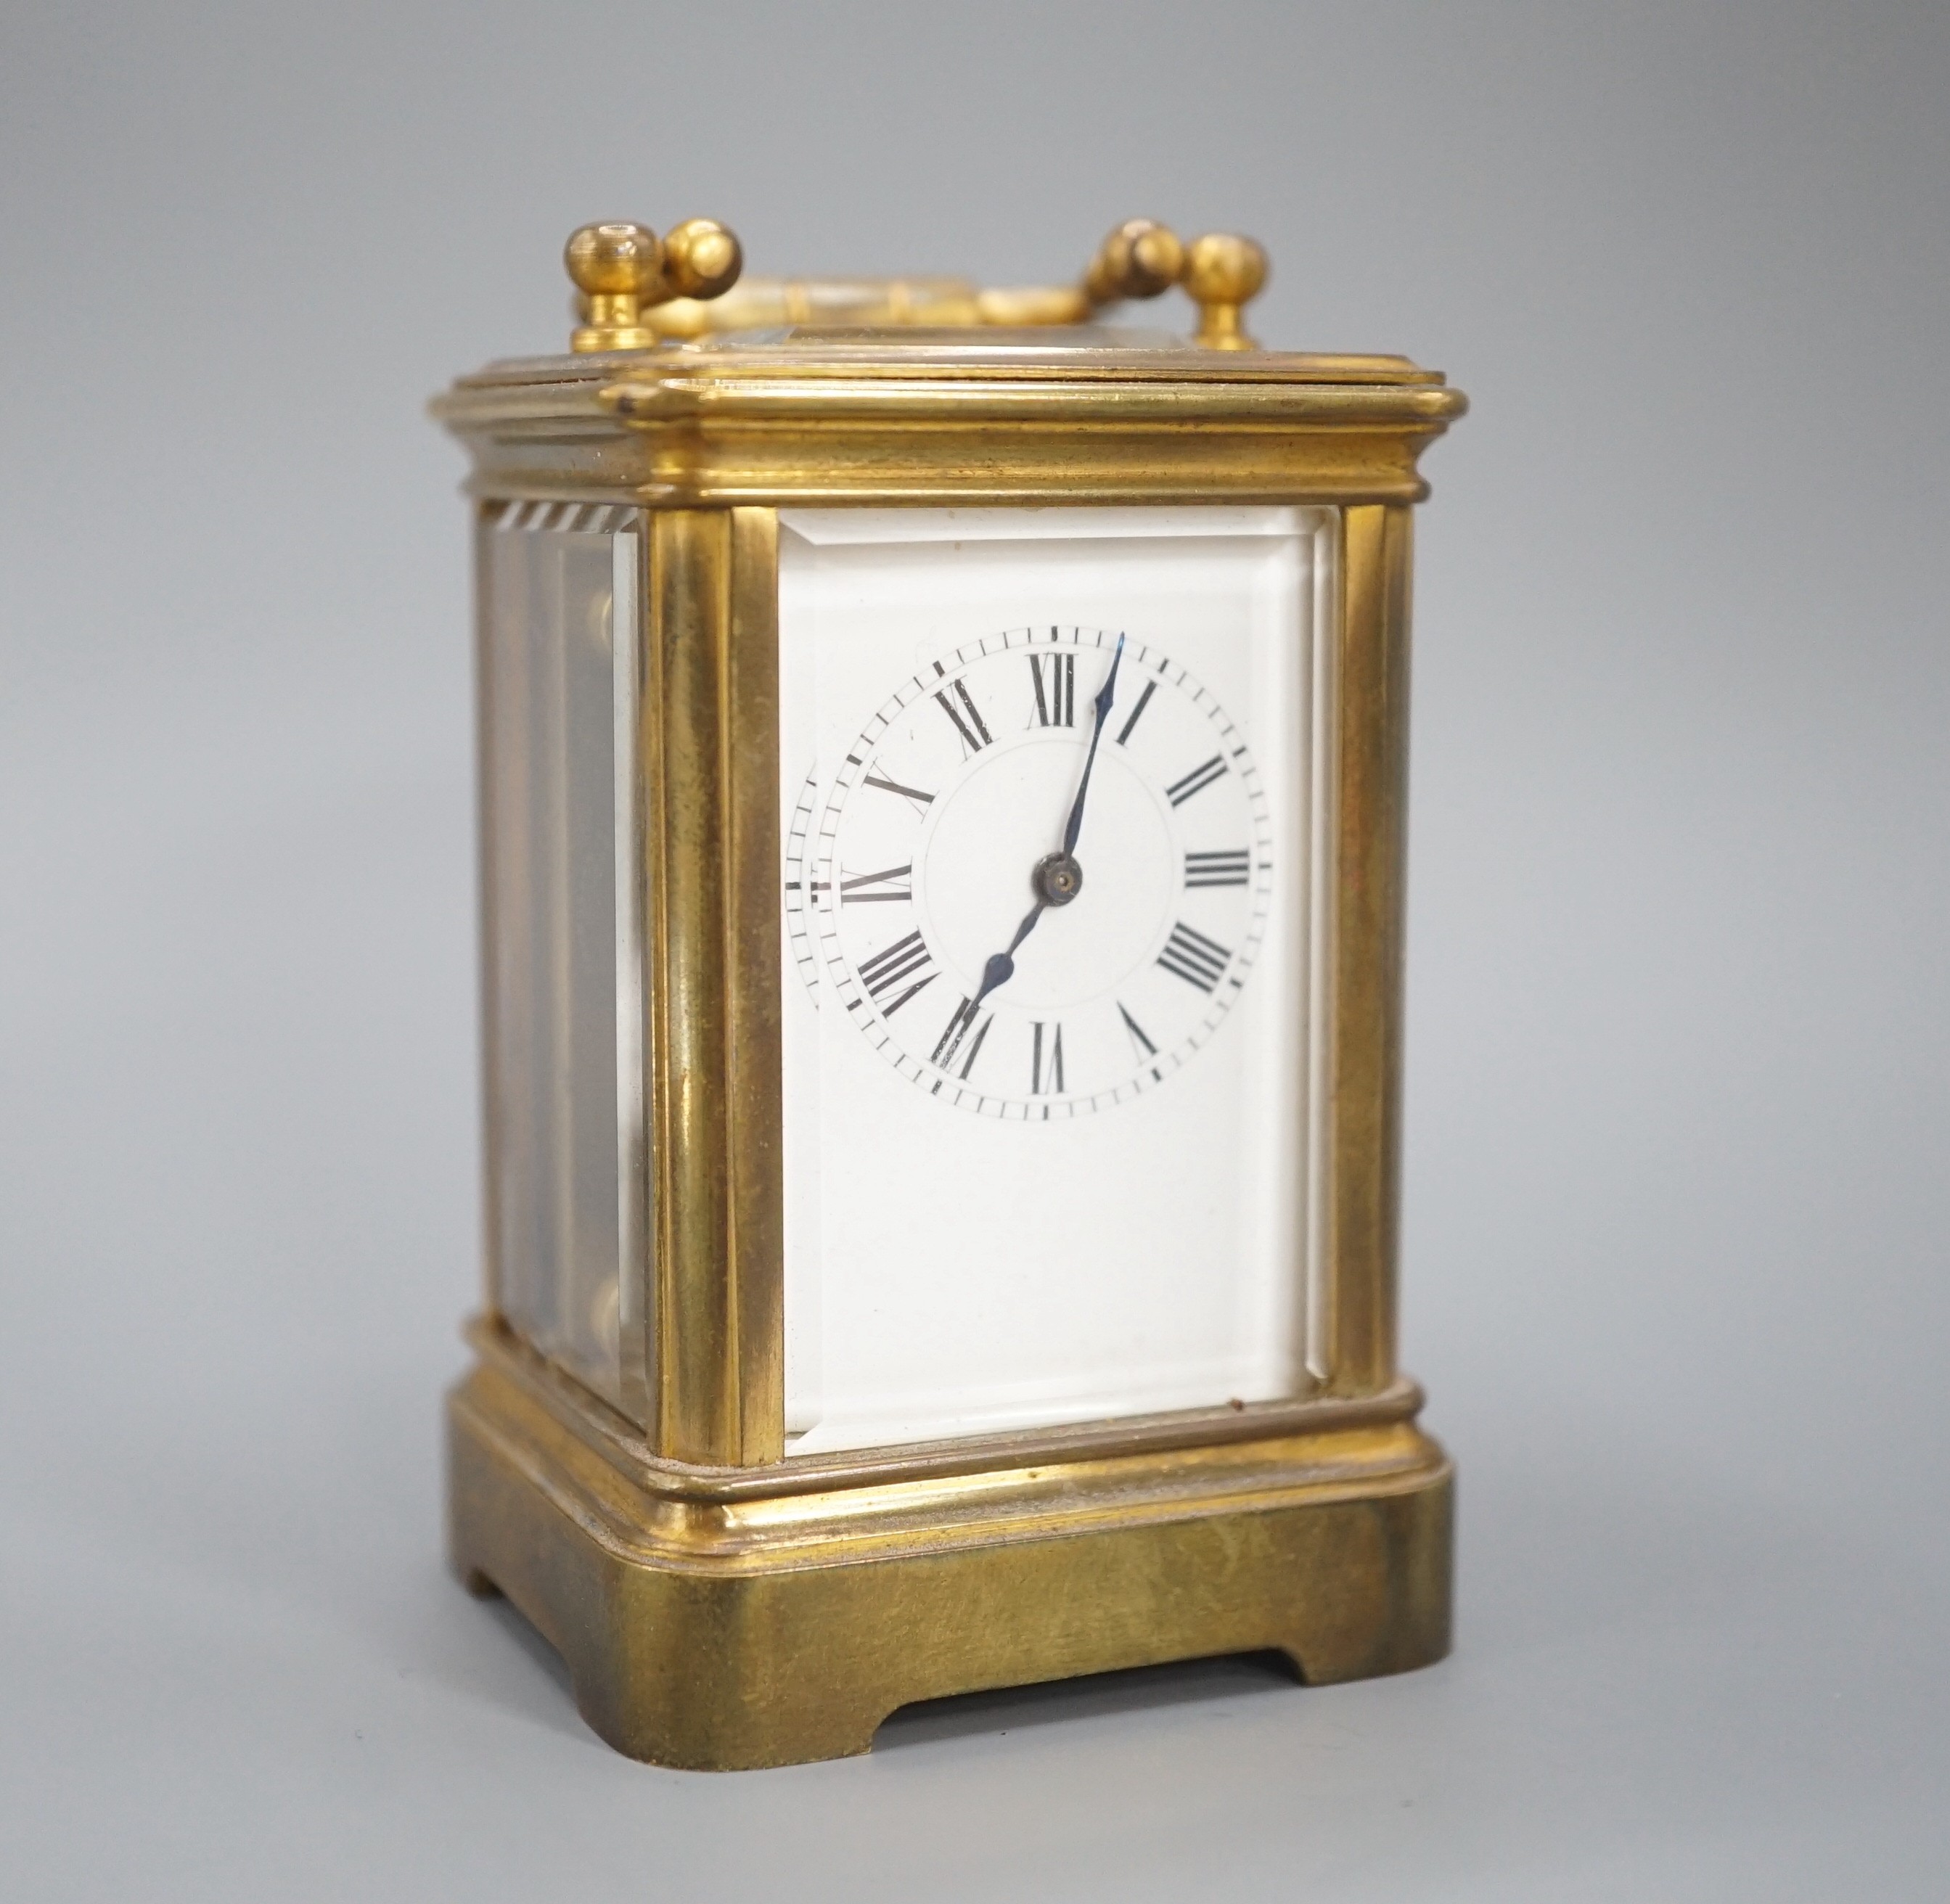 A Henri Jacot brass miniature carriage timepiece, 9.7 cm high with the handle up, cased